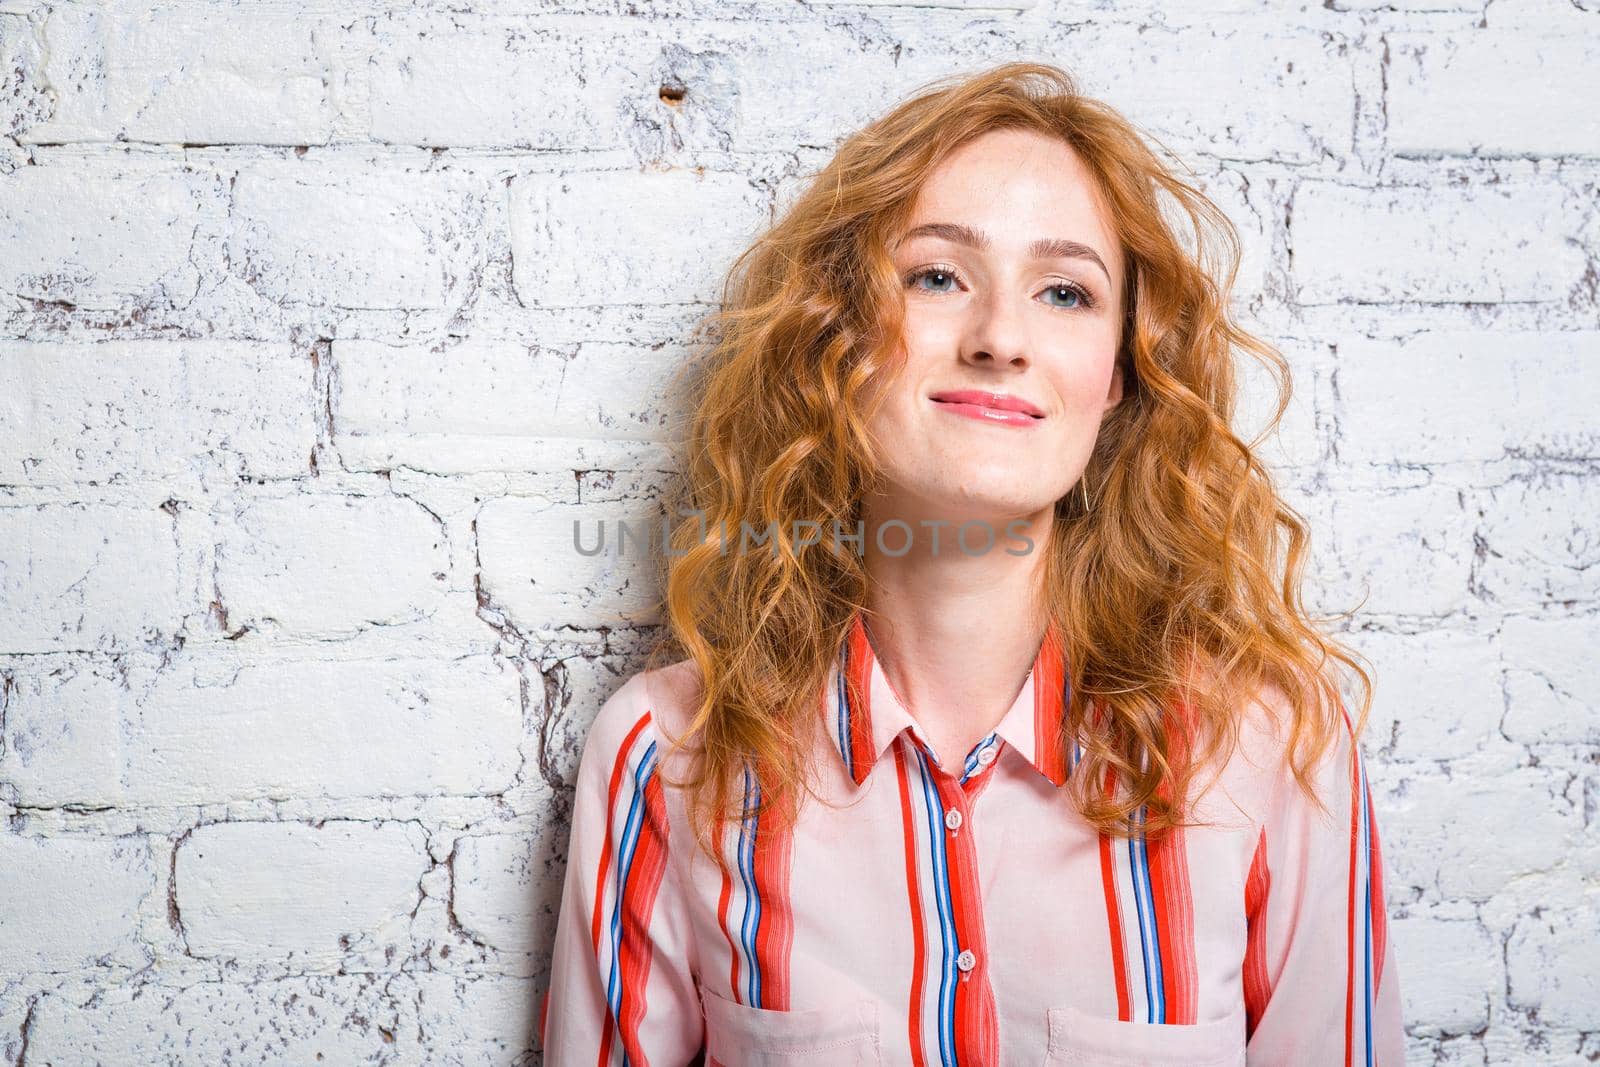 portrait of a beautiful beautiful young woman student with red curly hair and freckles on her face is leaning against a brick wall of gray color. Dressed in a red striped shirt.